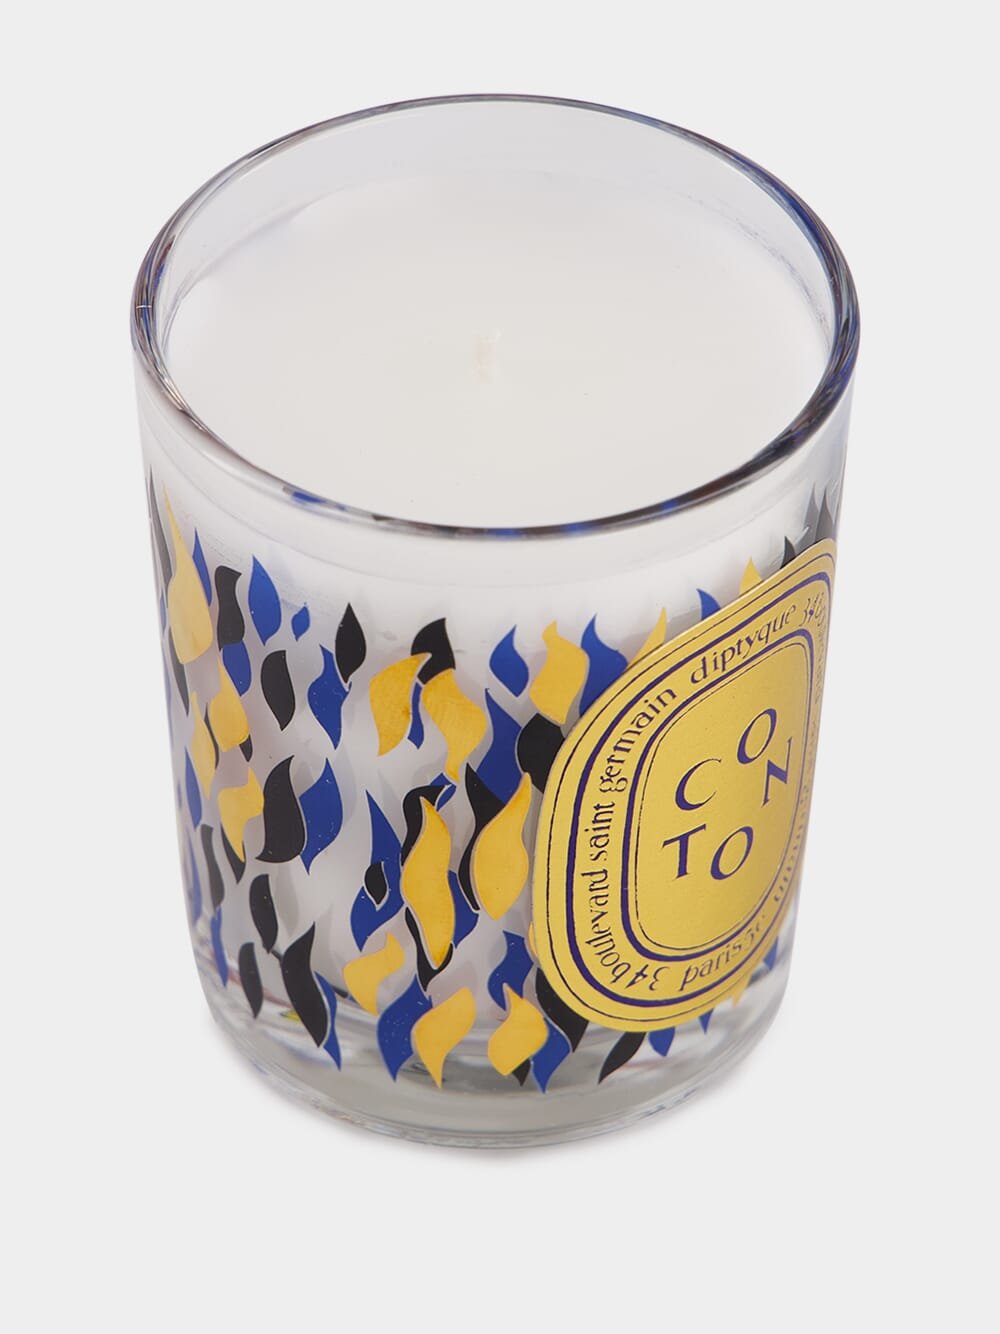 DiptyqueCoton Classic Candle 70g at Fashion Clinic